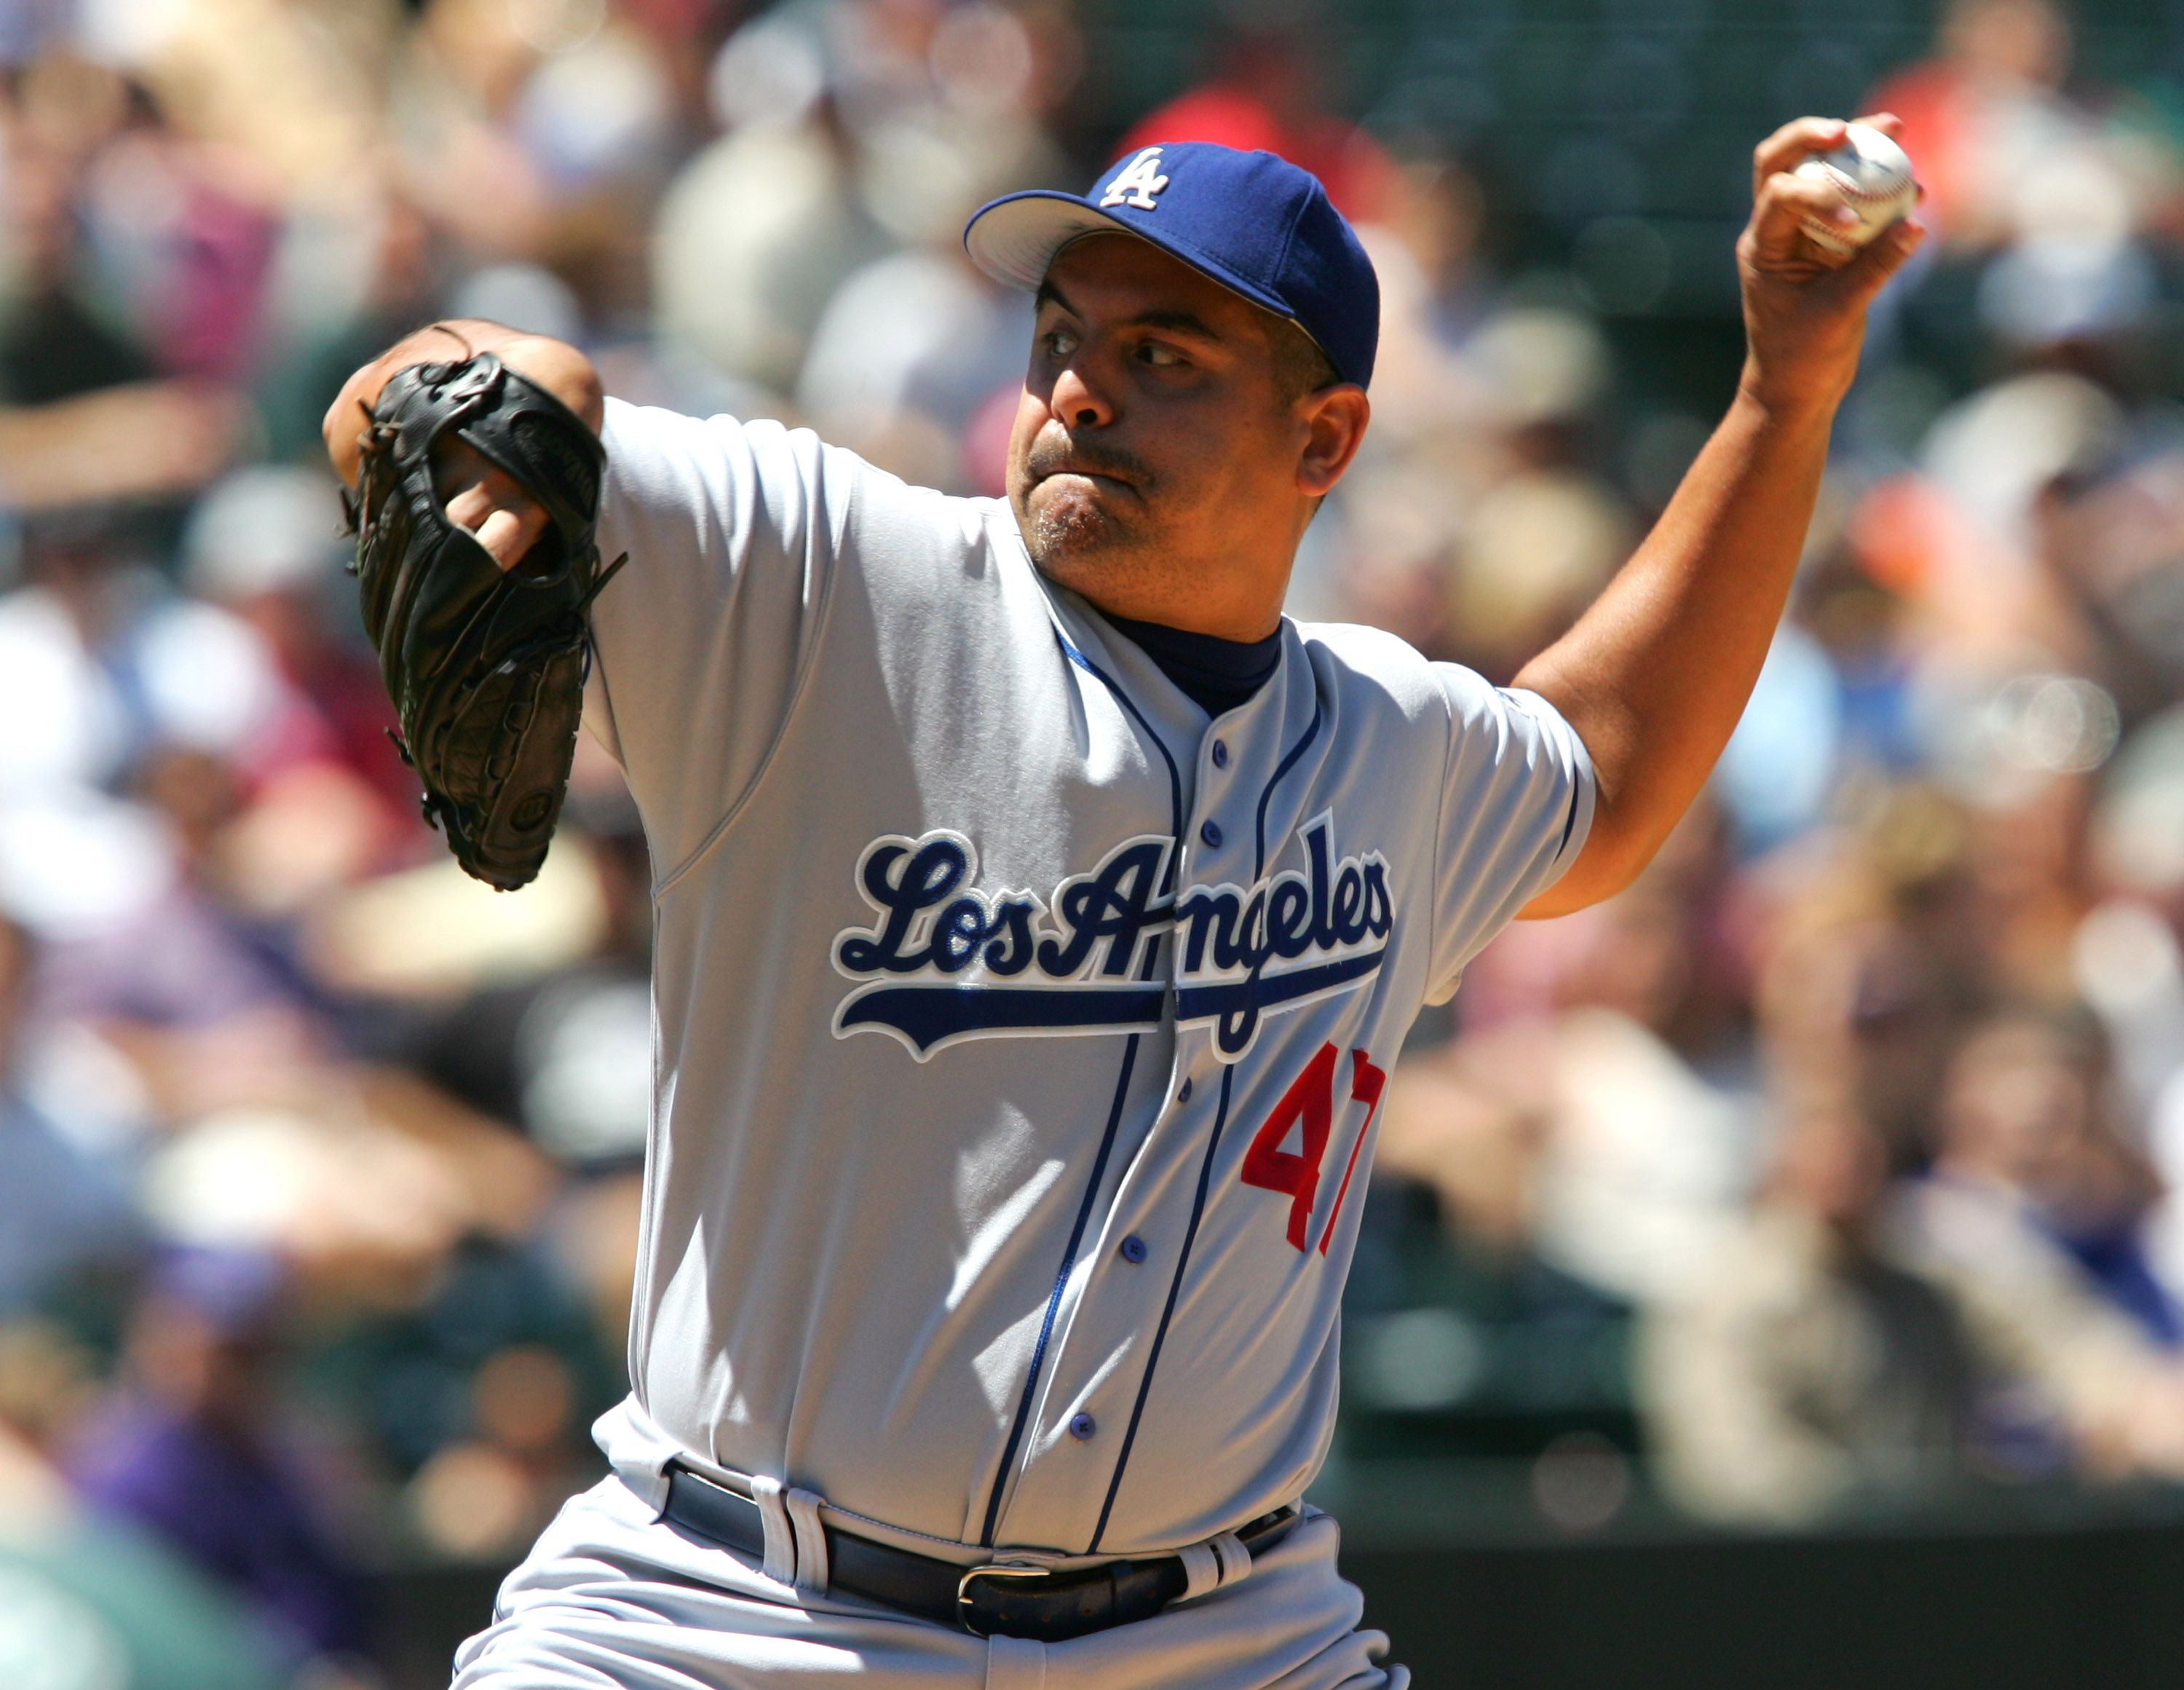 Los Angeles Dodgers starter Wilson Alvarez pitches during the game between the Colorado Rockies and the Los Angeles Dodgers at Coors Field in Denver, Colorado on July 29, 2004. The Dodgers won 3-2. (Photo by Jon Soohoo/Getty Images)